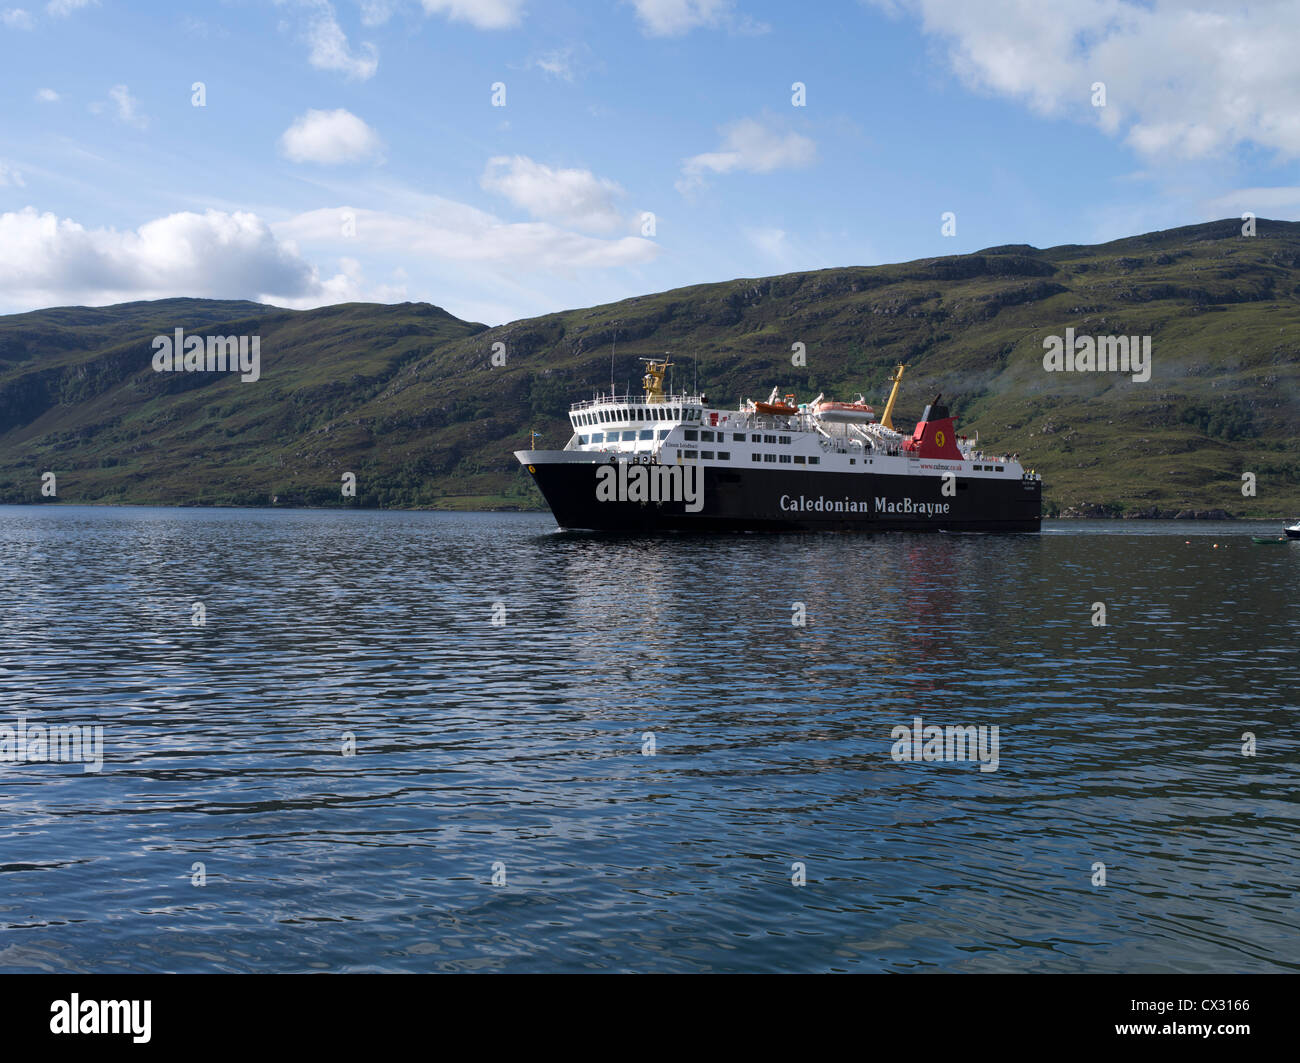 dh Loch Broom scotland ULLAPOOL ROSS CROMARTY Outer Herbrides ferry Isle of Lewis arriving calmac scottish island ferries sailing boat Stock Photo